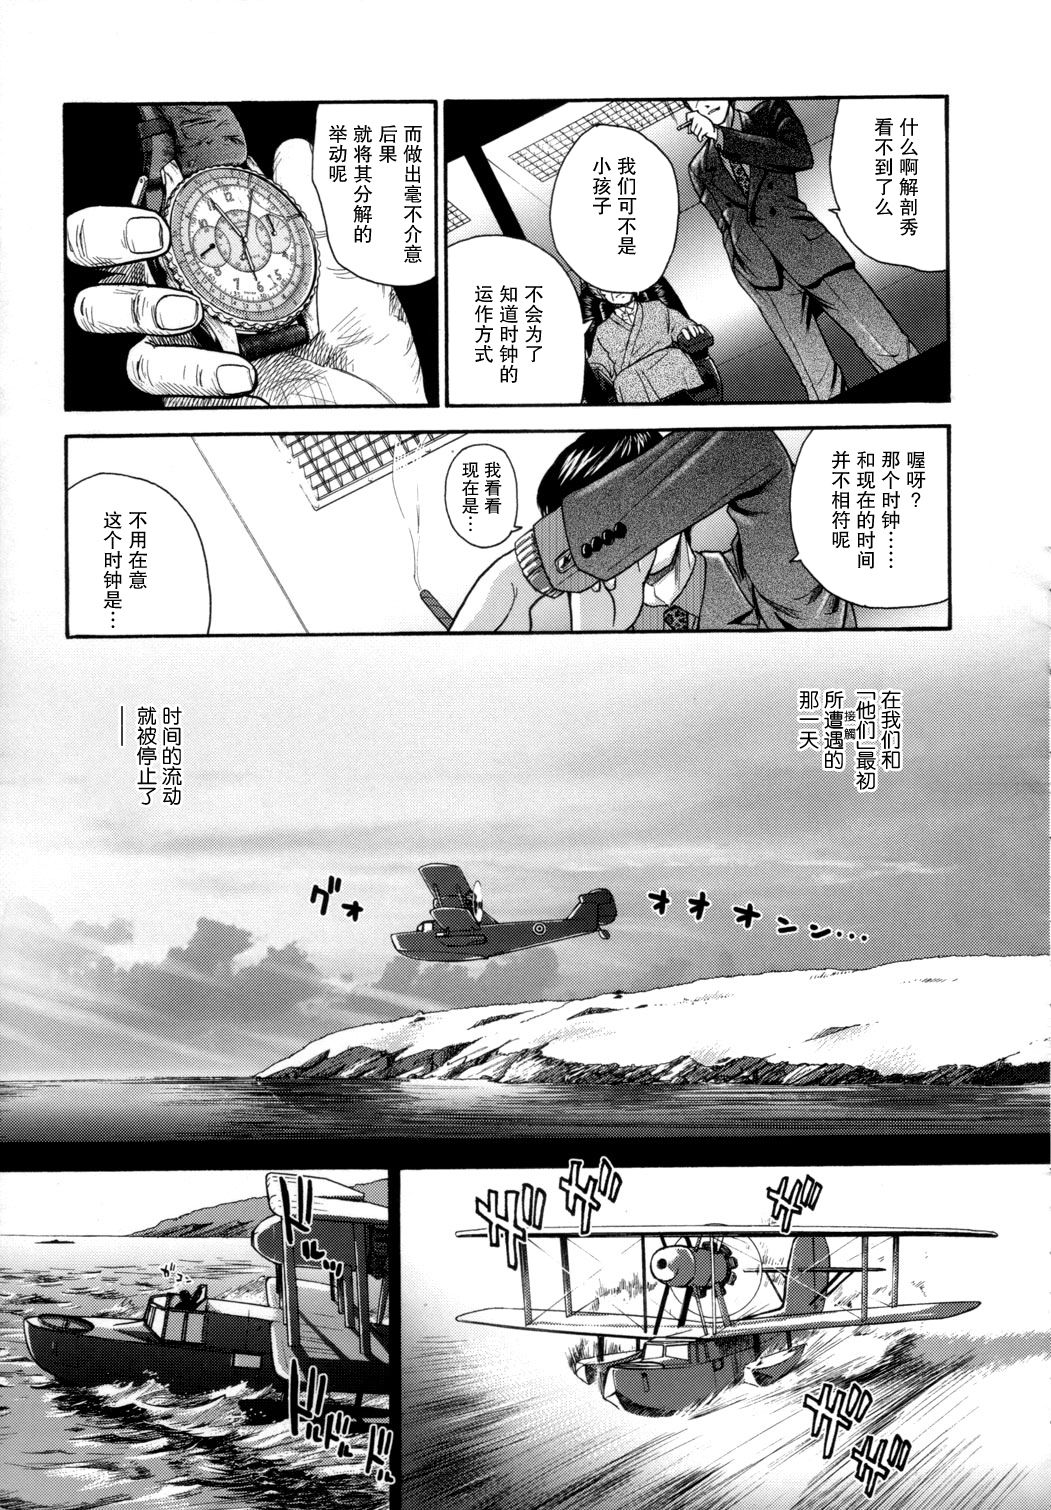 (C72) [Behind Moon (Q)] Dulce Report 9 | 达西报告 9 [Chinese] [哈尼喵汉化组] [Decensored] page 27 full